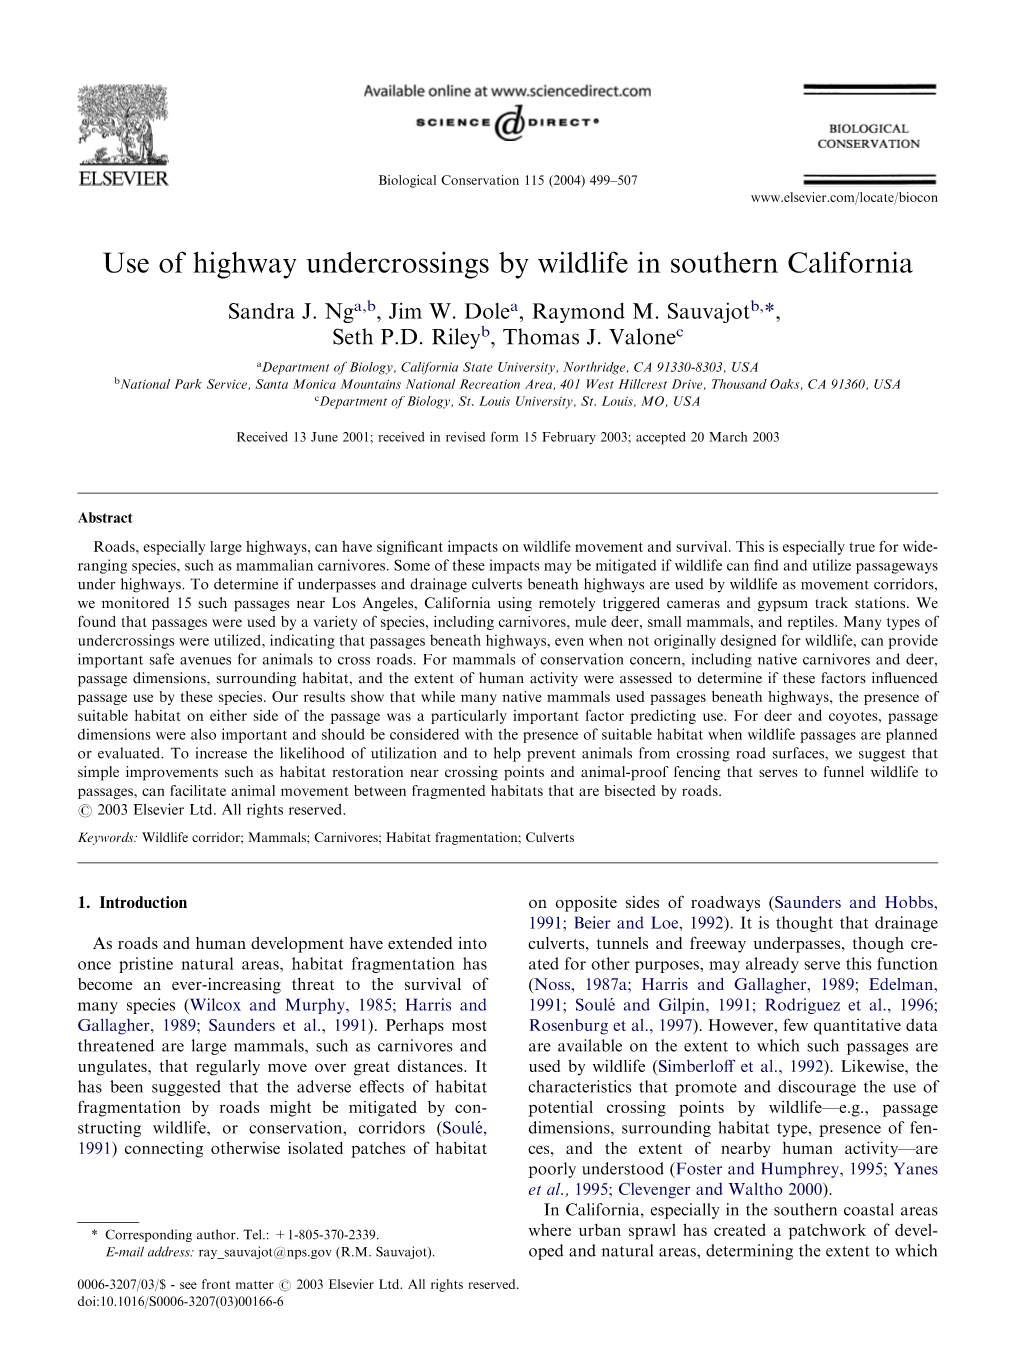 Use of Highway Undercrossings by Wildlife in Southern California